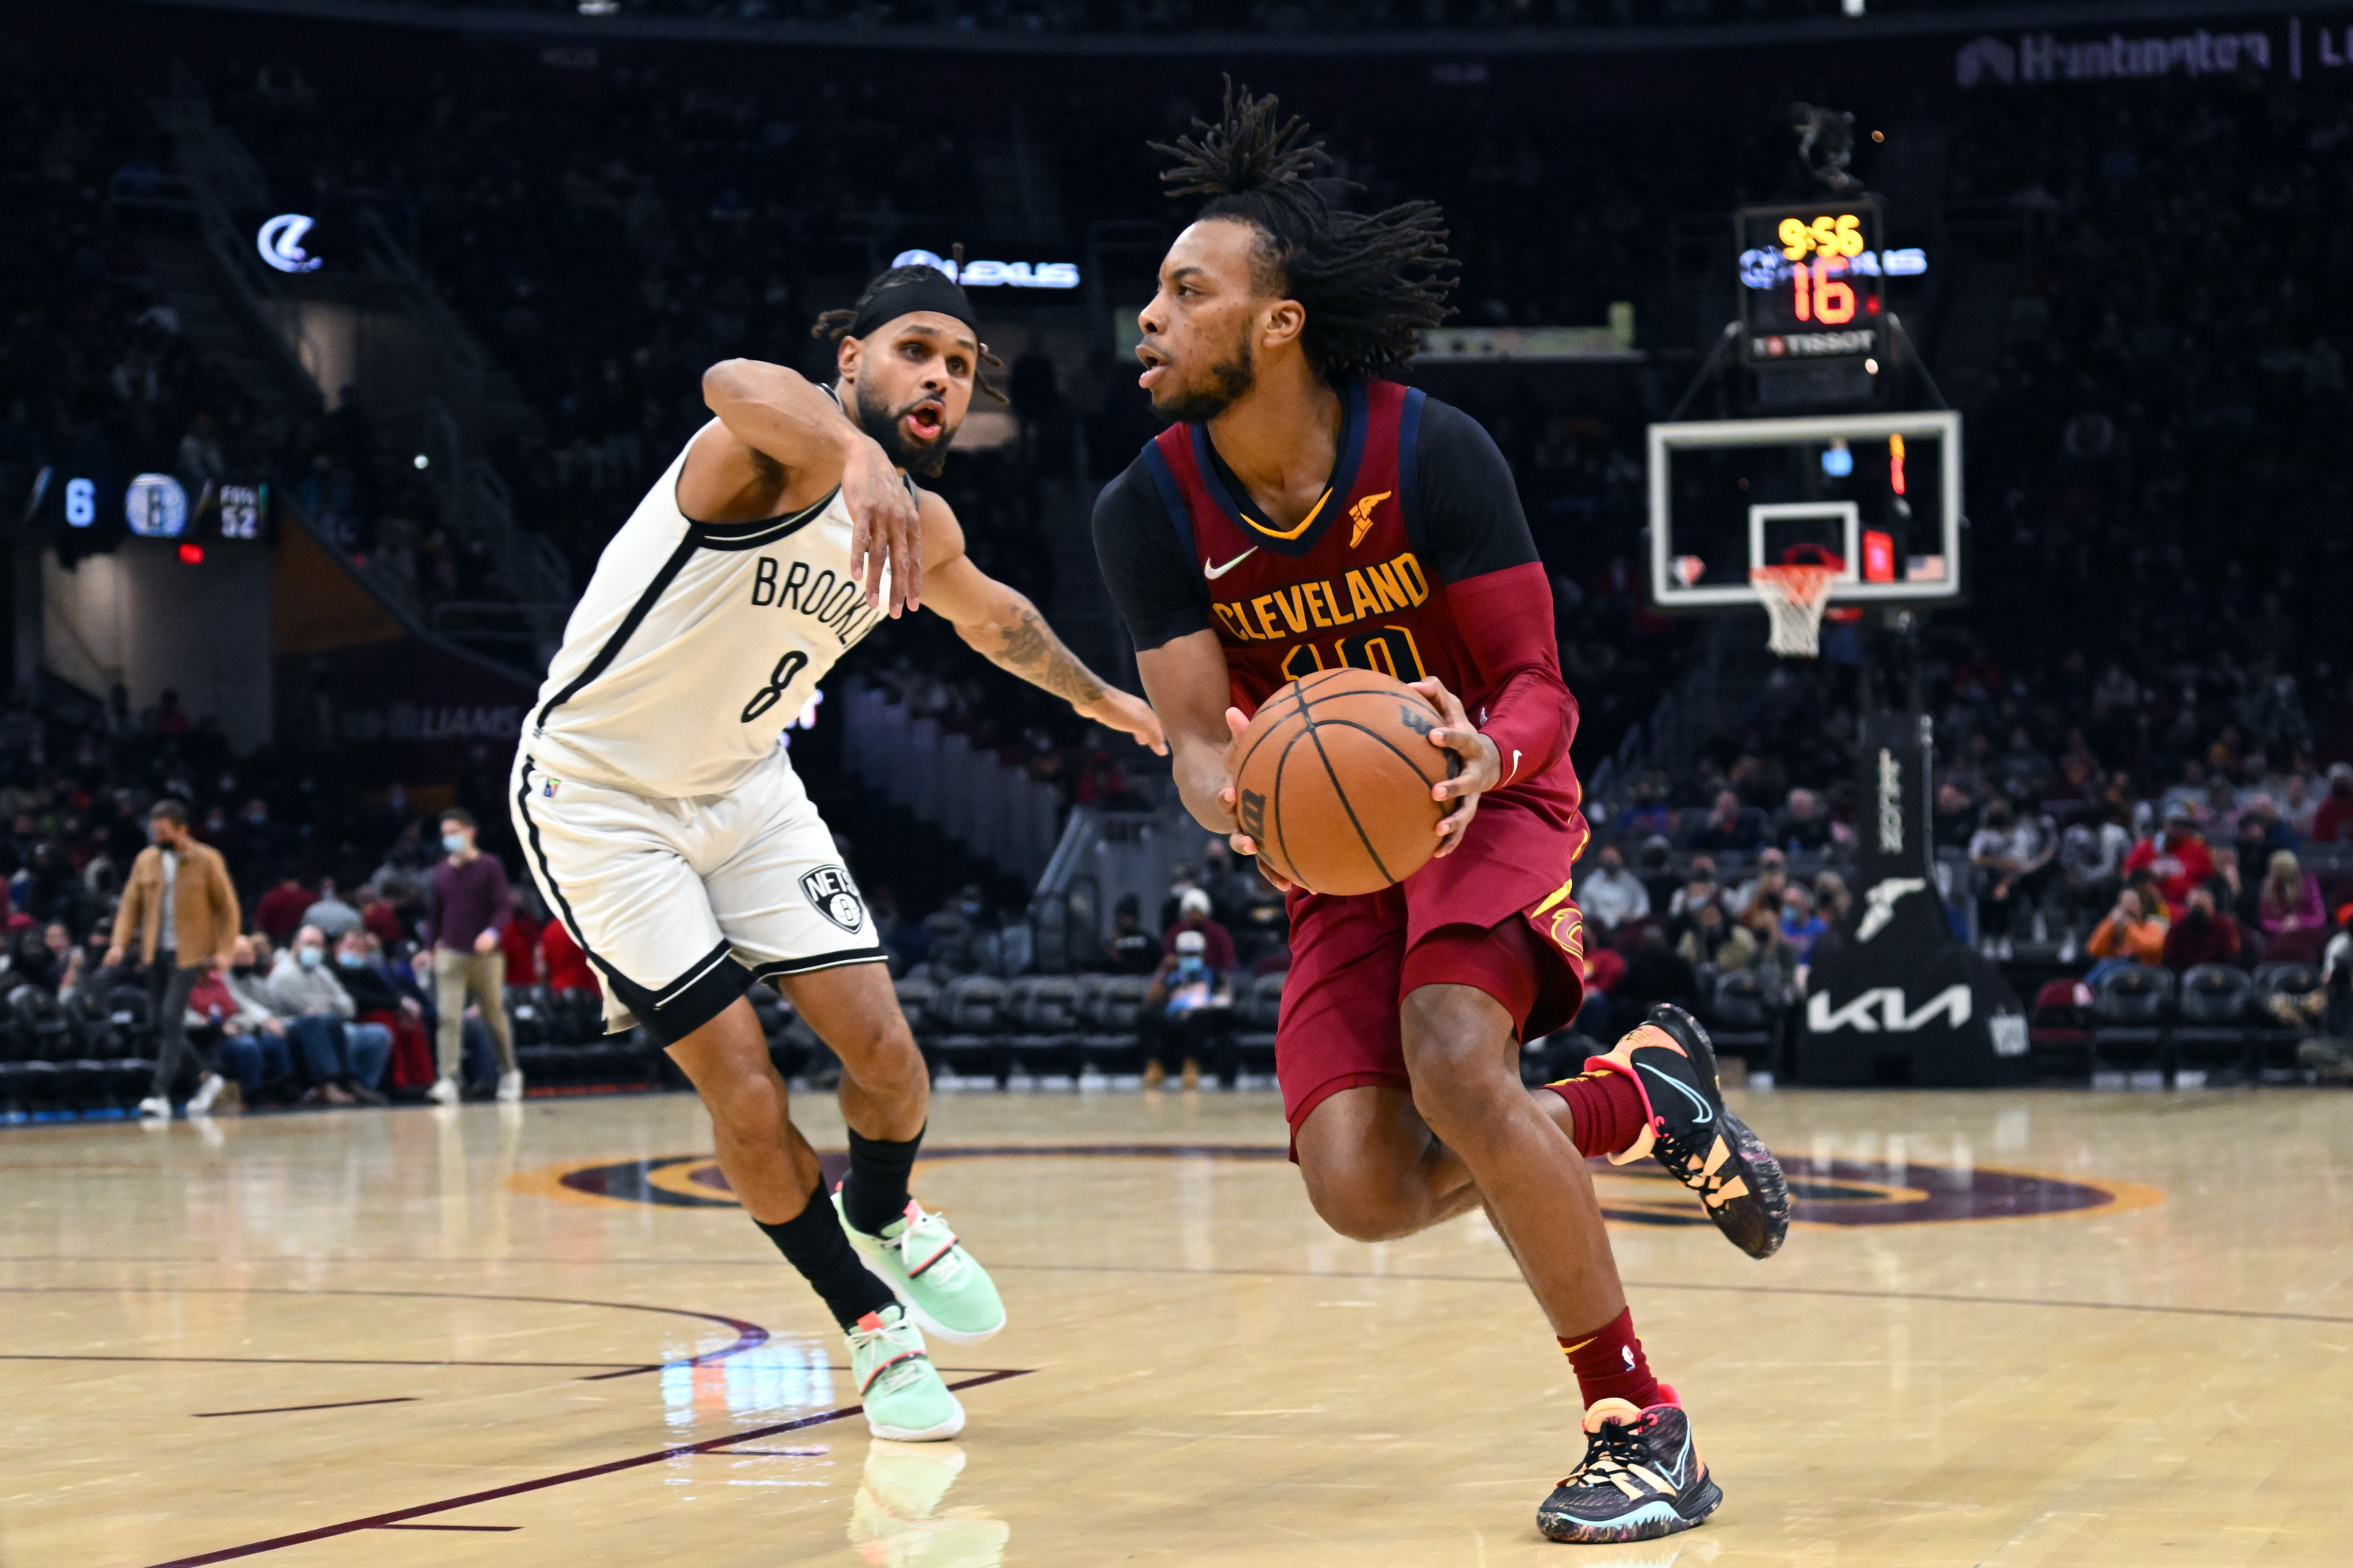 Garland, Cavaliers battle back from 16 down to beat Hornets